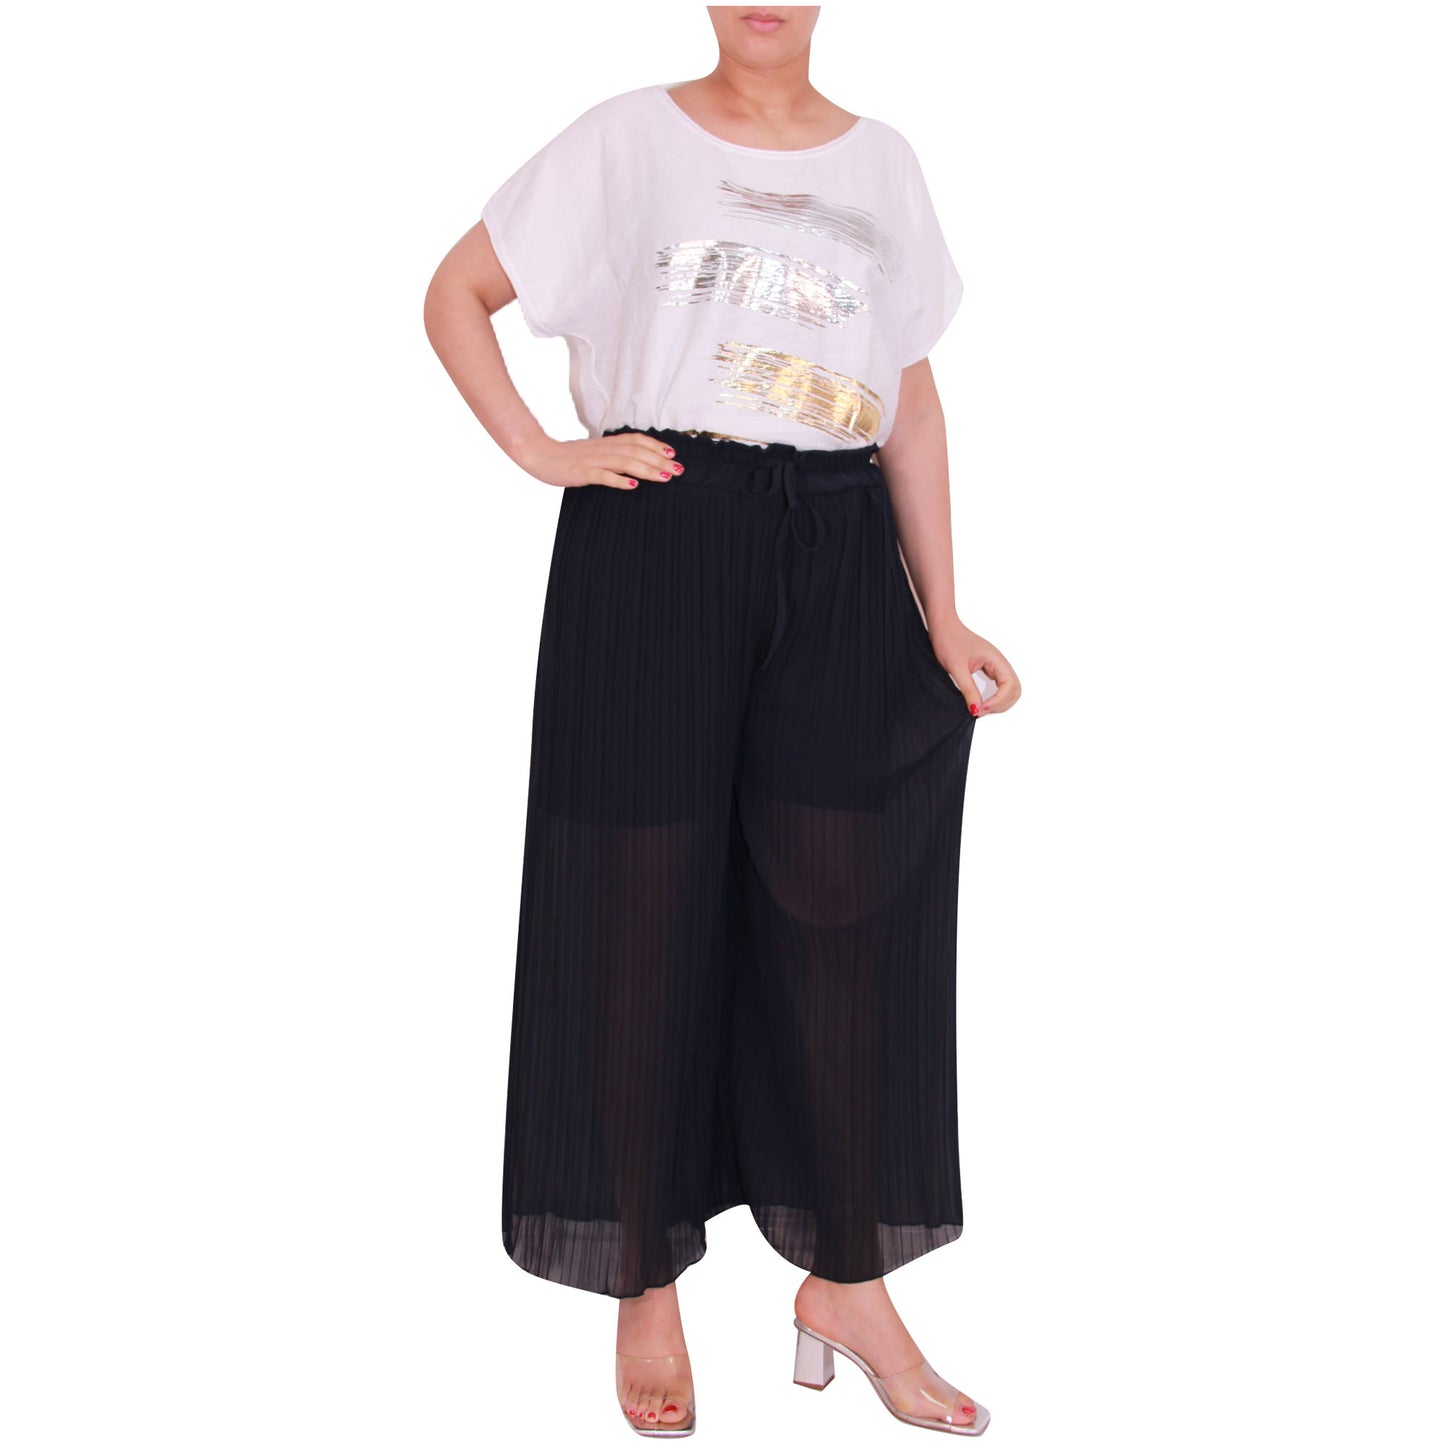 Flowy and Chic: Women's Pleated Palazzo Pants with Wide Legs and Chiffon Fabric for Office and Casual Wear